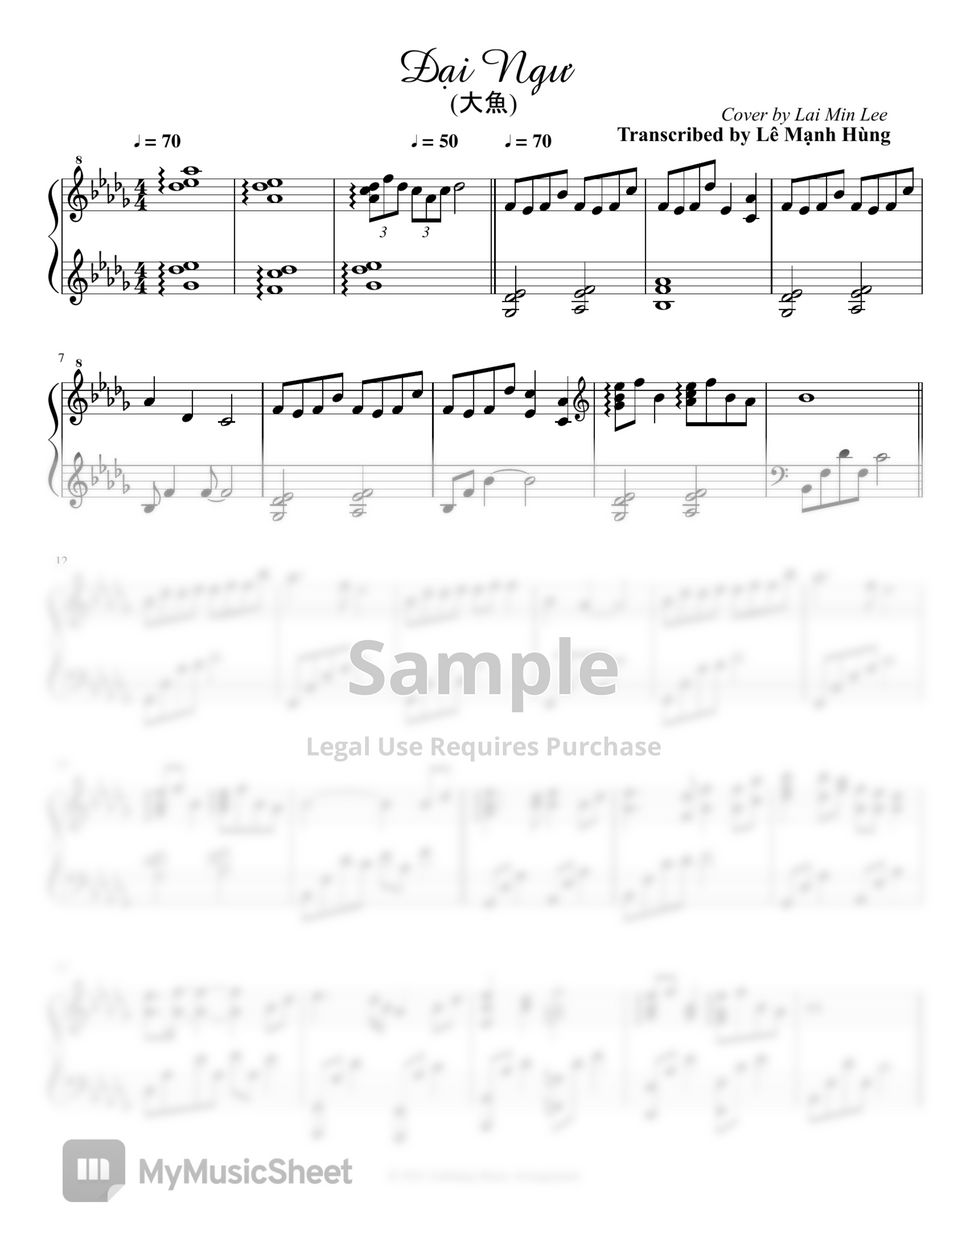 Cover by Lai Min Lee - Đại Ngư (大魚) (Transcribed) Sheets by Le Manh Hung